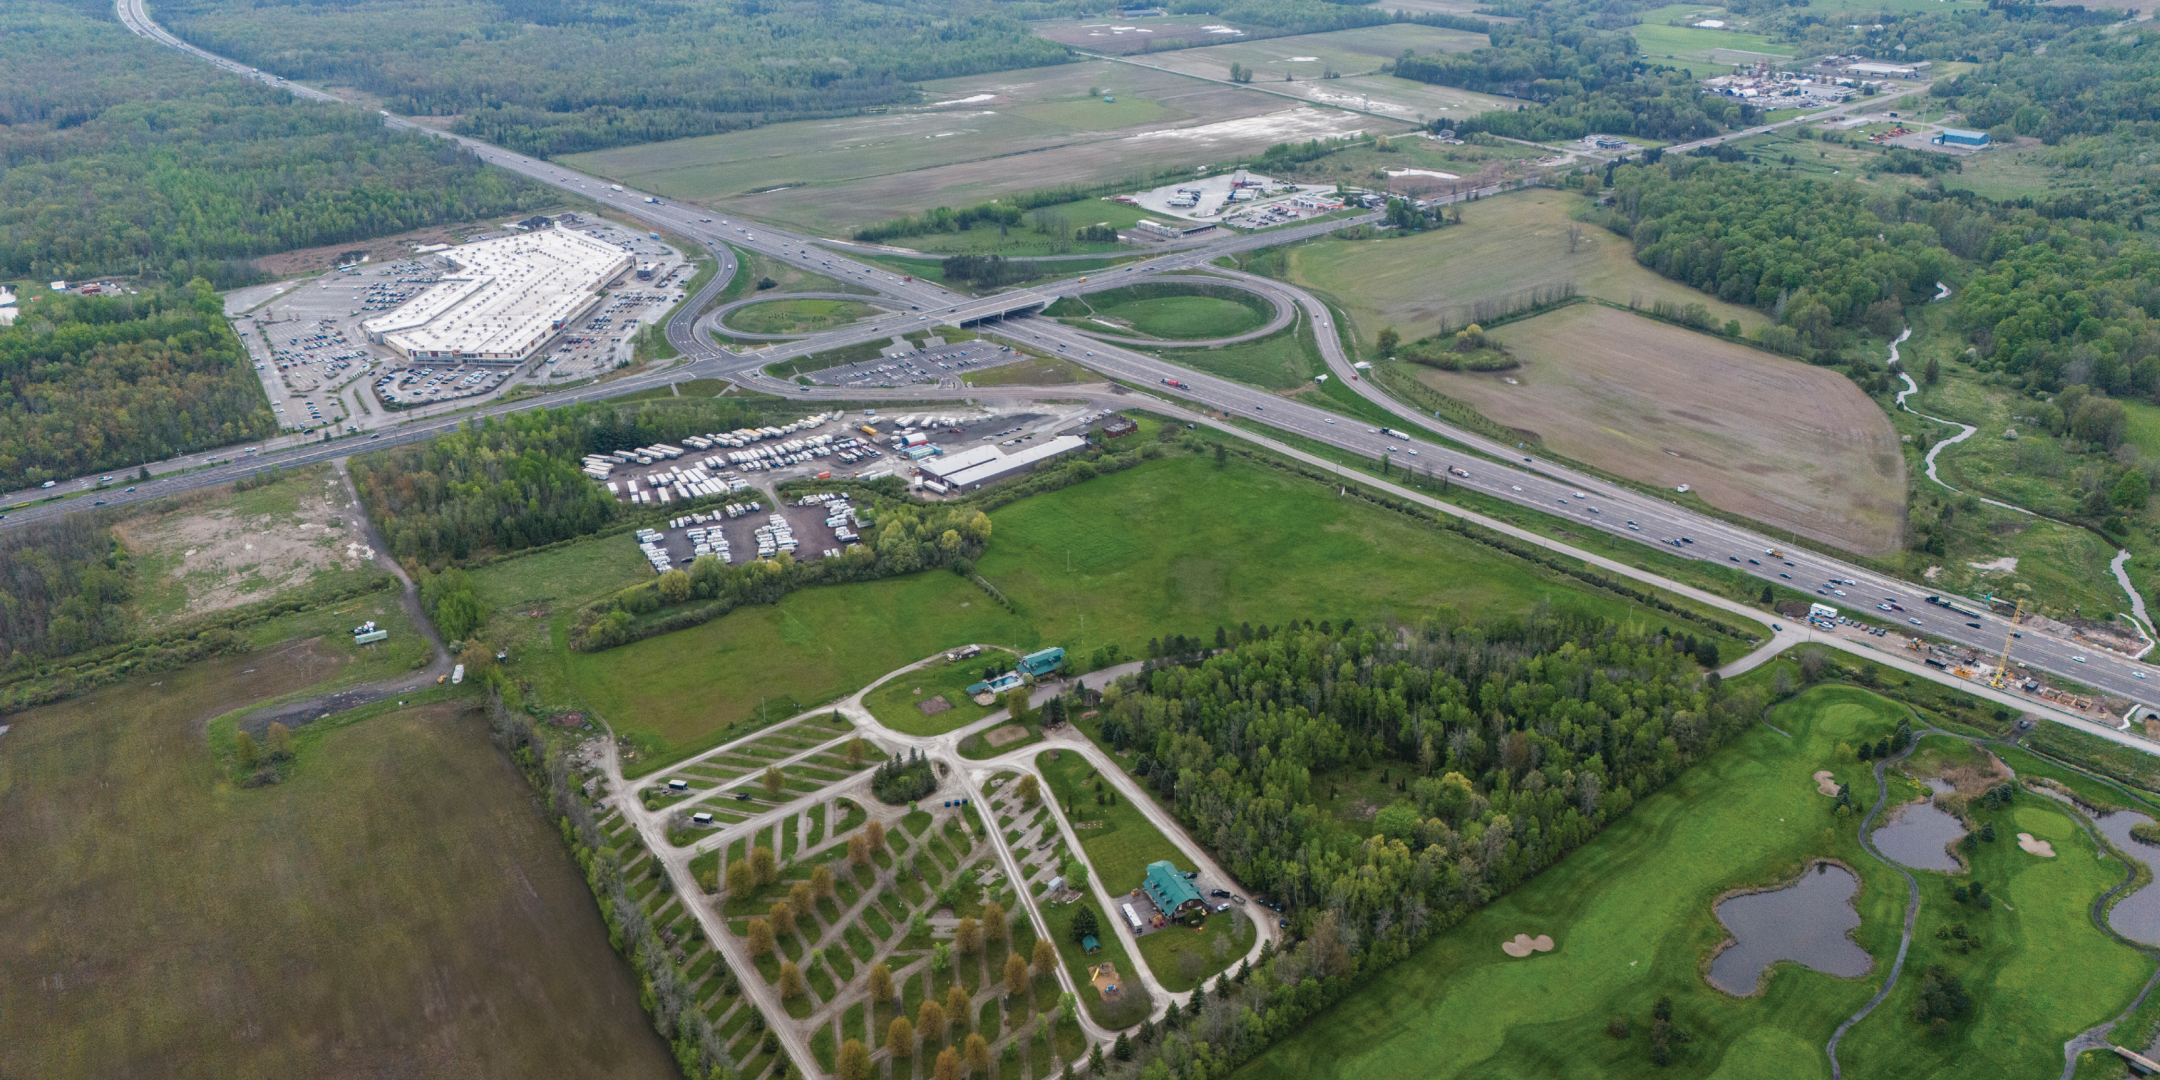 65 Reive Boulevard Aerial view of Land Property with nearby highways